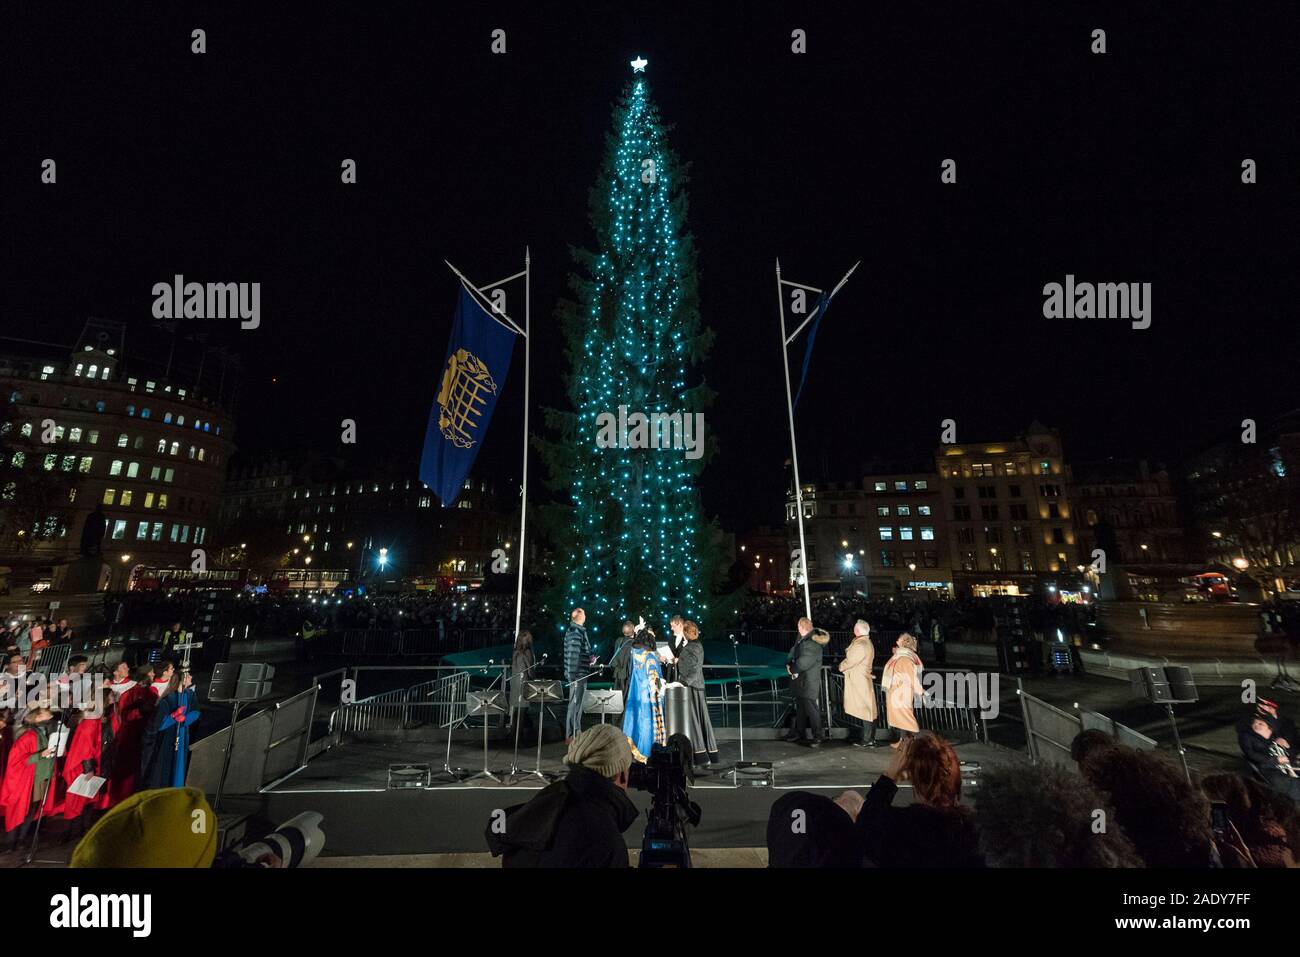 London, UK.  5 December 2019.  The annual lighting of the Christmas Tree takes place in Trafalgar Square.  The tree, a Norwegian spruce, is donated by the City of Oslo to the people of London each year as a token of gratitude for Britain’s support during the Second World War.  This year, the tree has been criticised for having branches which look too sparse. Credit: Stephen Chung / Alamy Live News Stock Photo